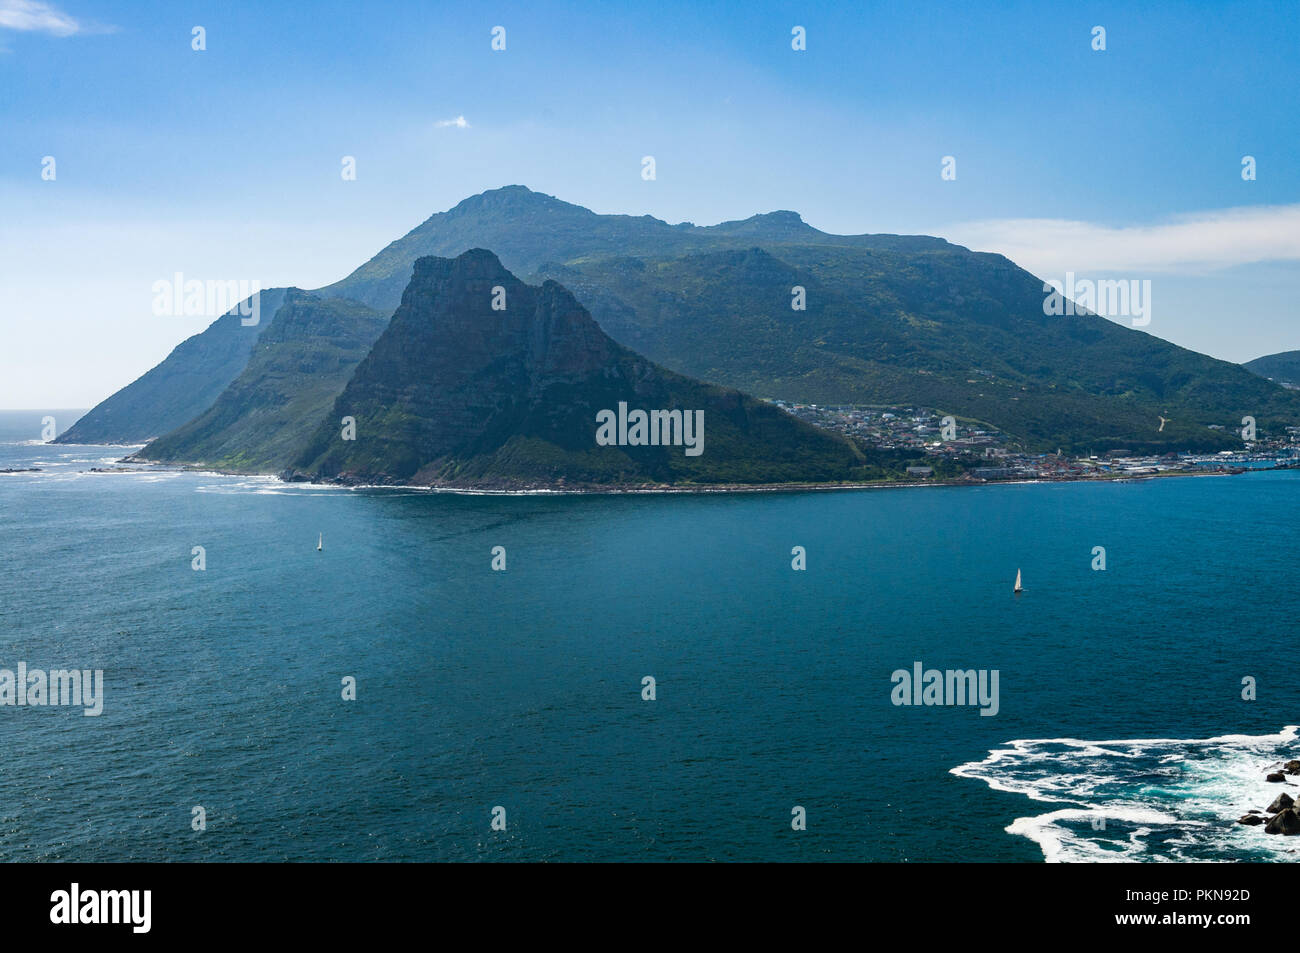 The Cape of Good Hope, sailing boats, South Atlantic ocean, Hout Bay, South Africa Stock Photo